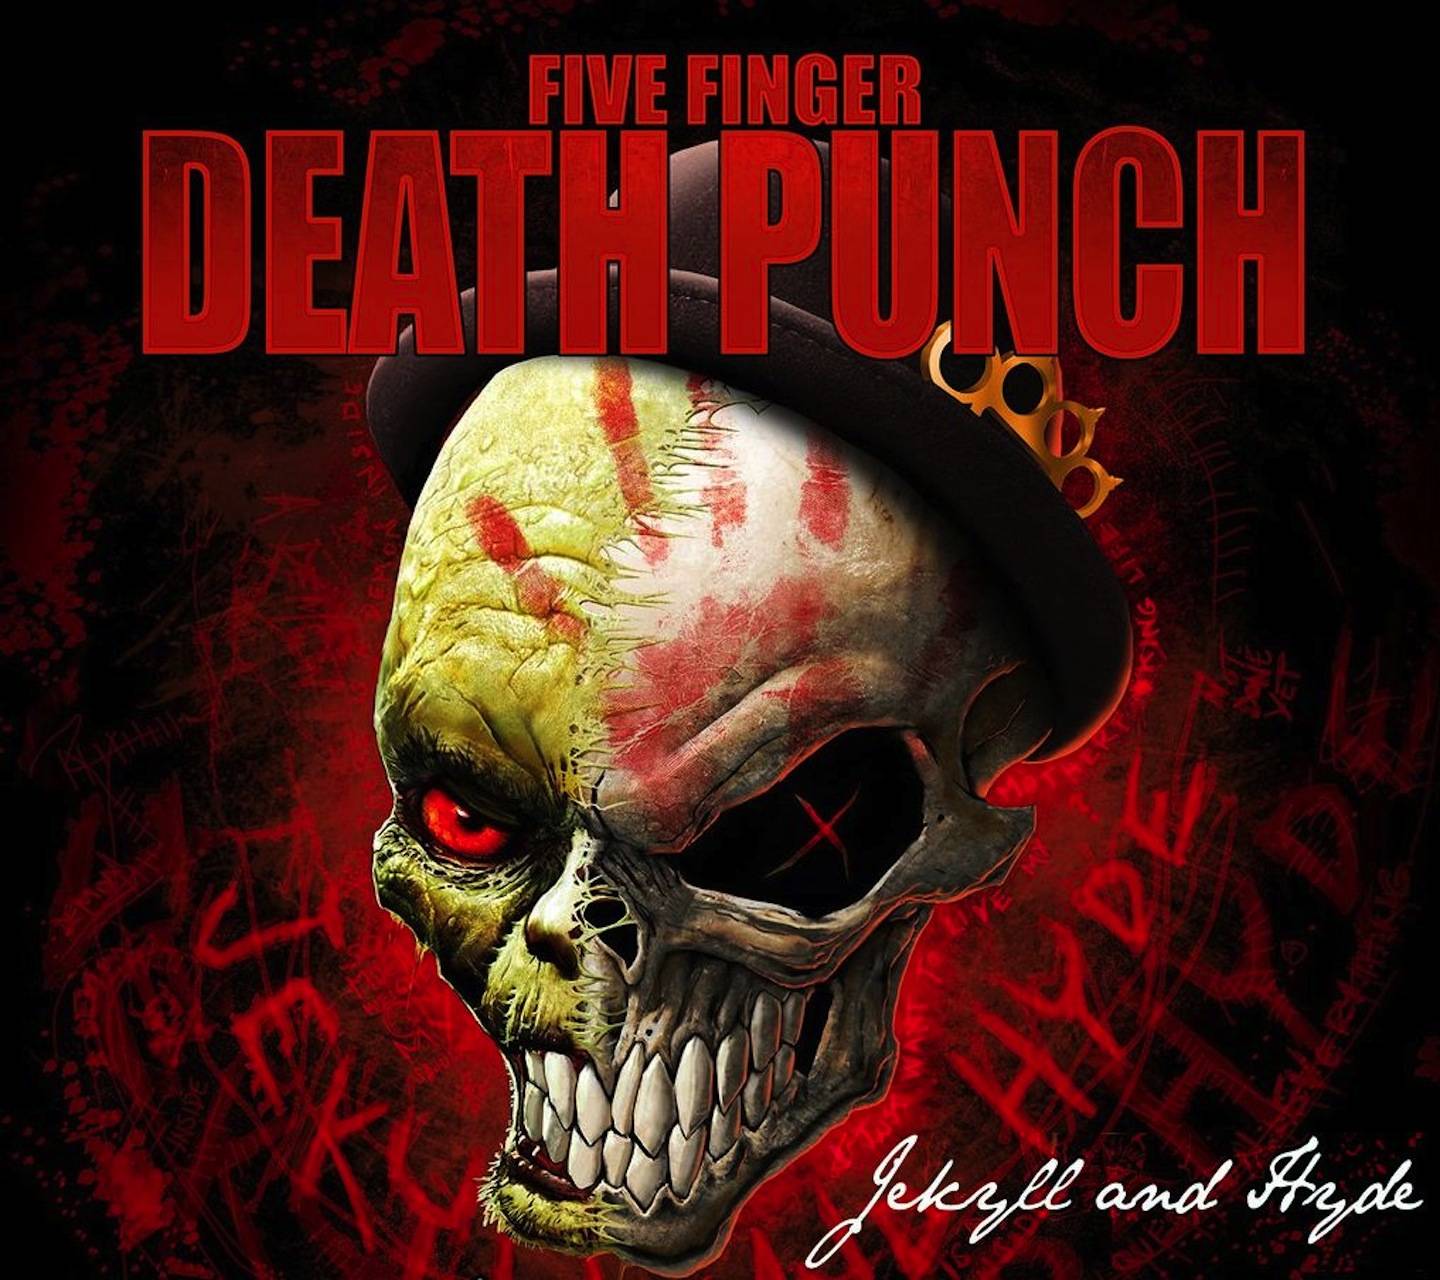 Download free five finger death punch wallpaper for your mobile